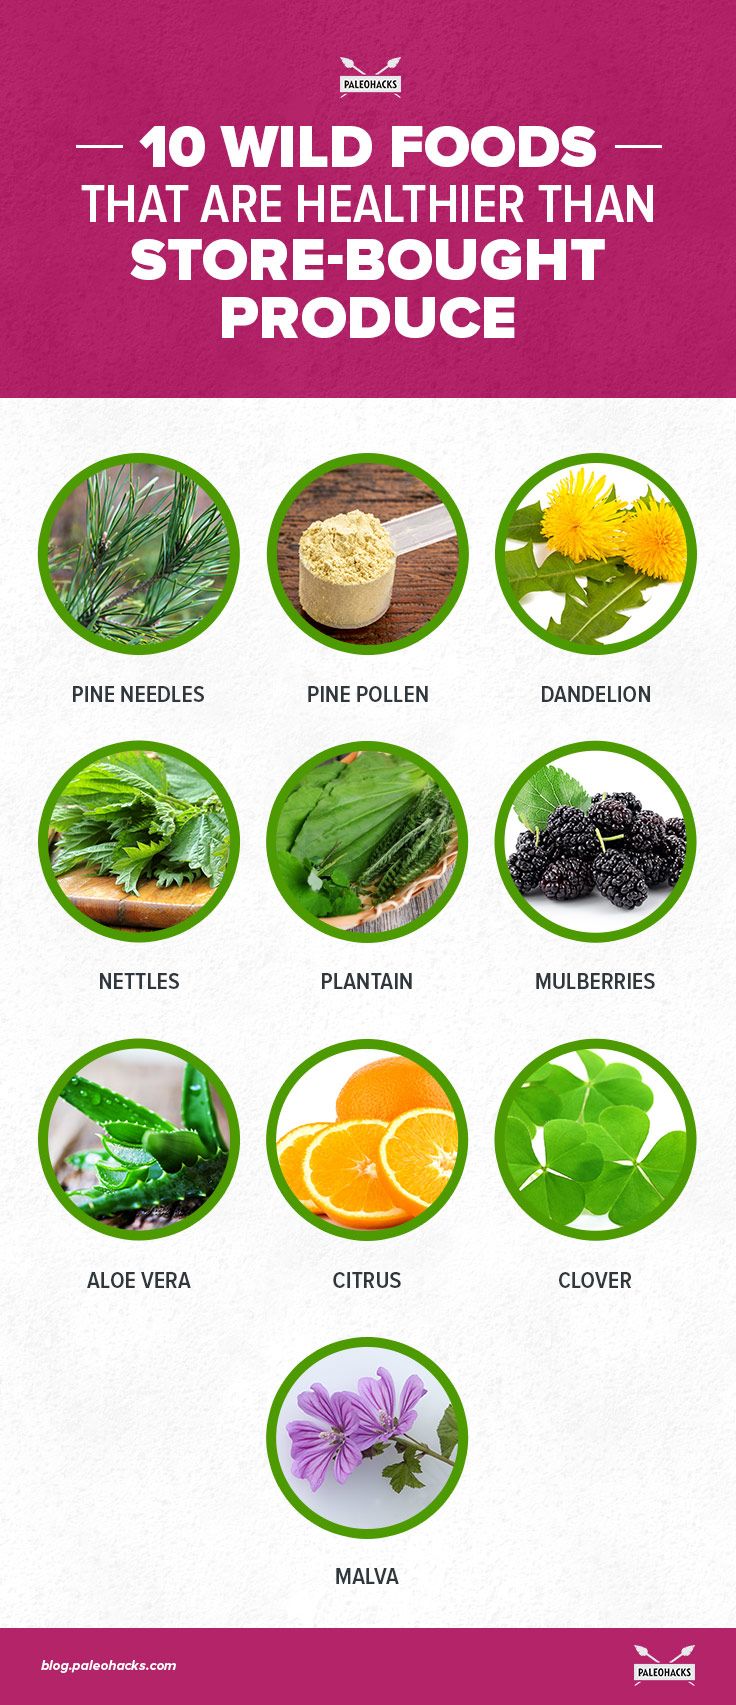 10-Wild-Foods-That-Are-Healthier-Than-Store-Bought-Produce-infog